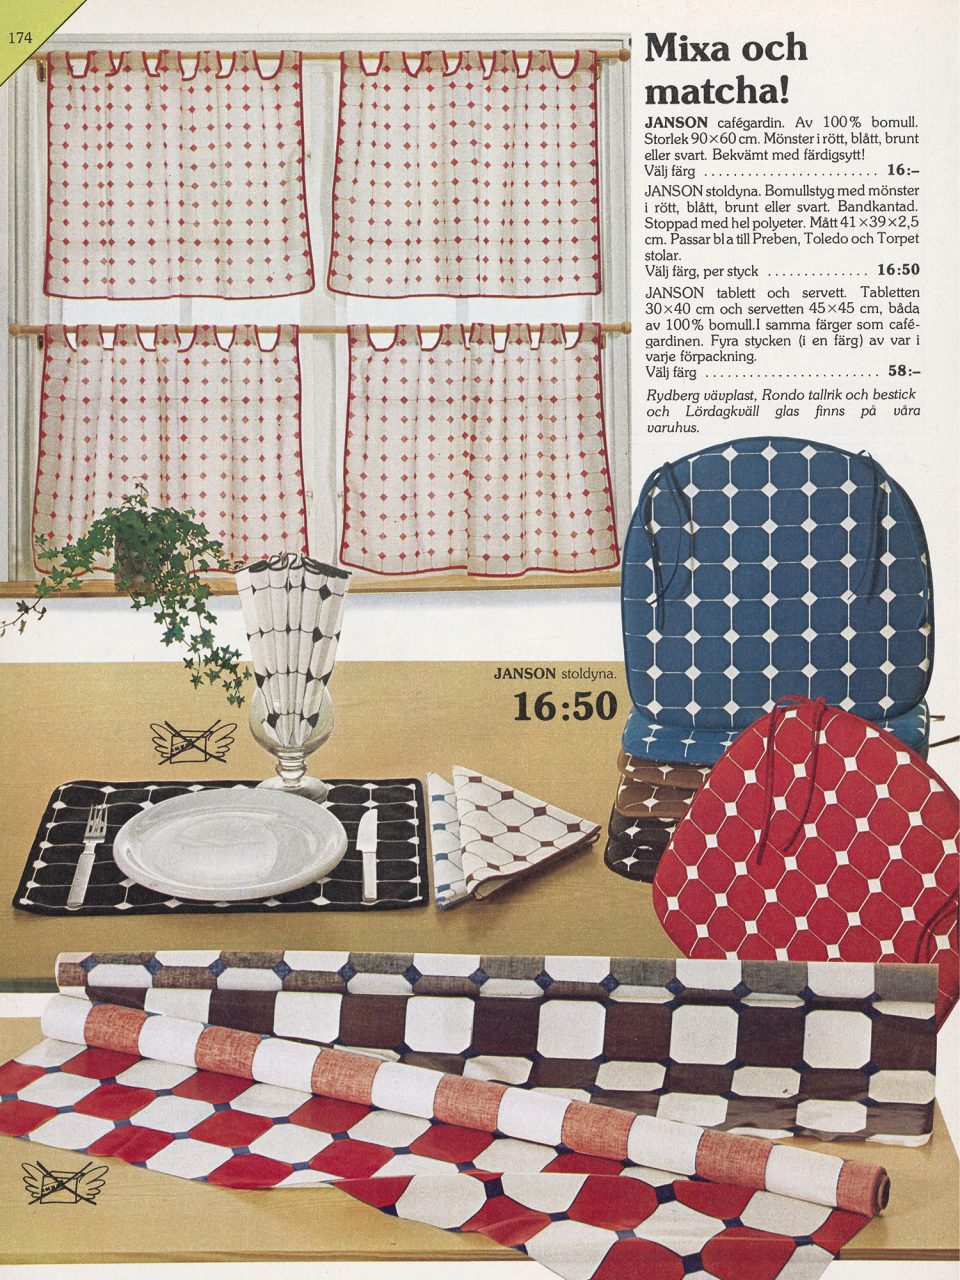 1978 IKEA catalogue showcasing curtains, tablecloths, and seat cushions under the title 